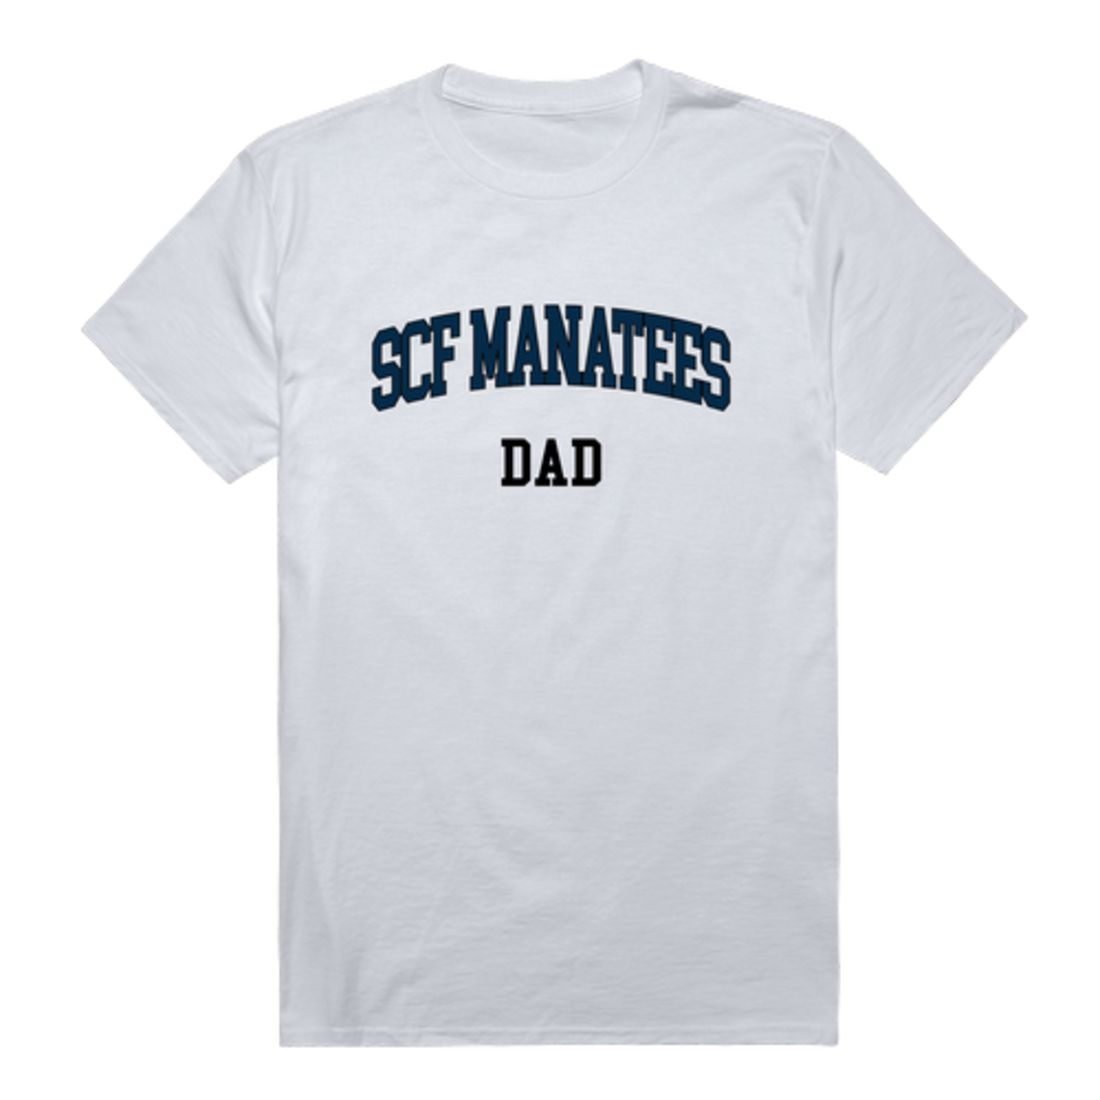 State College of Florida Manatees Dad T-Shirt